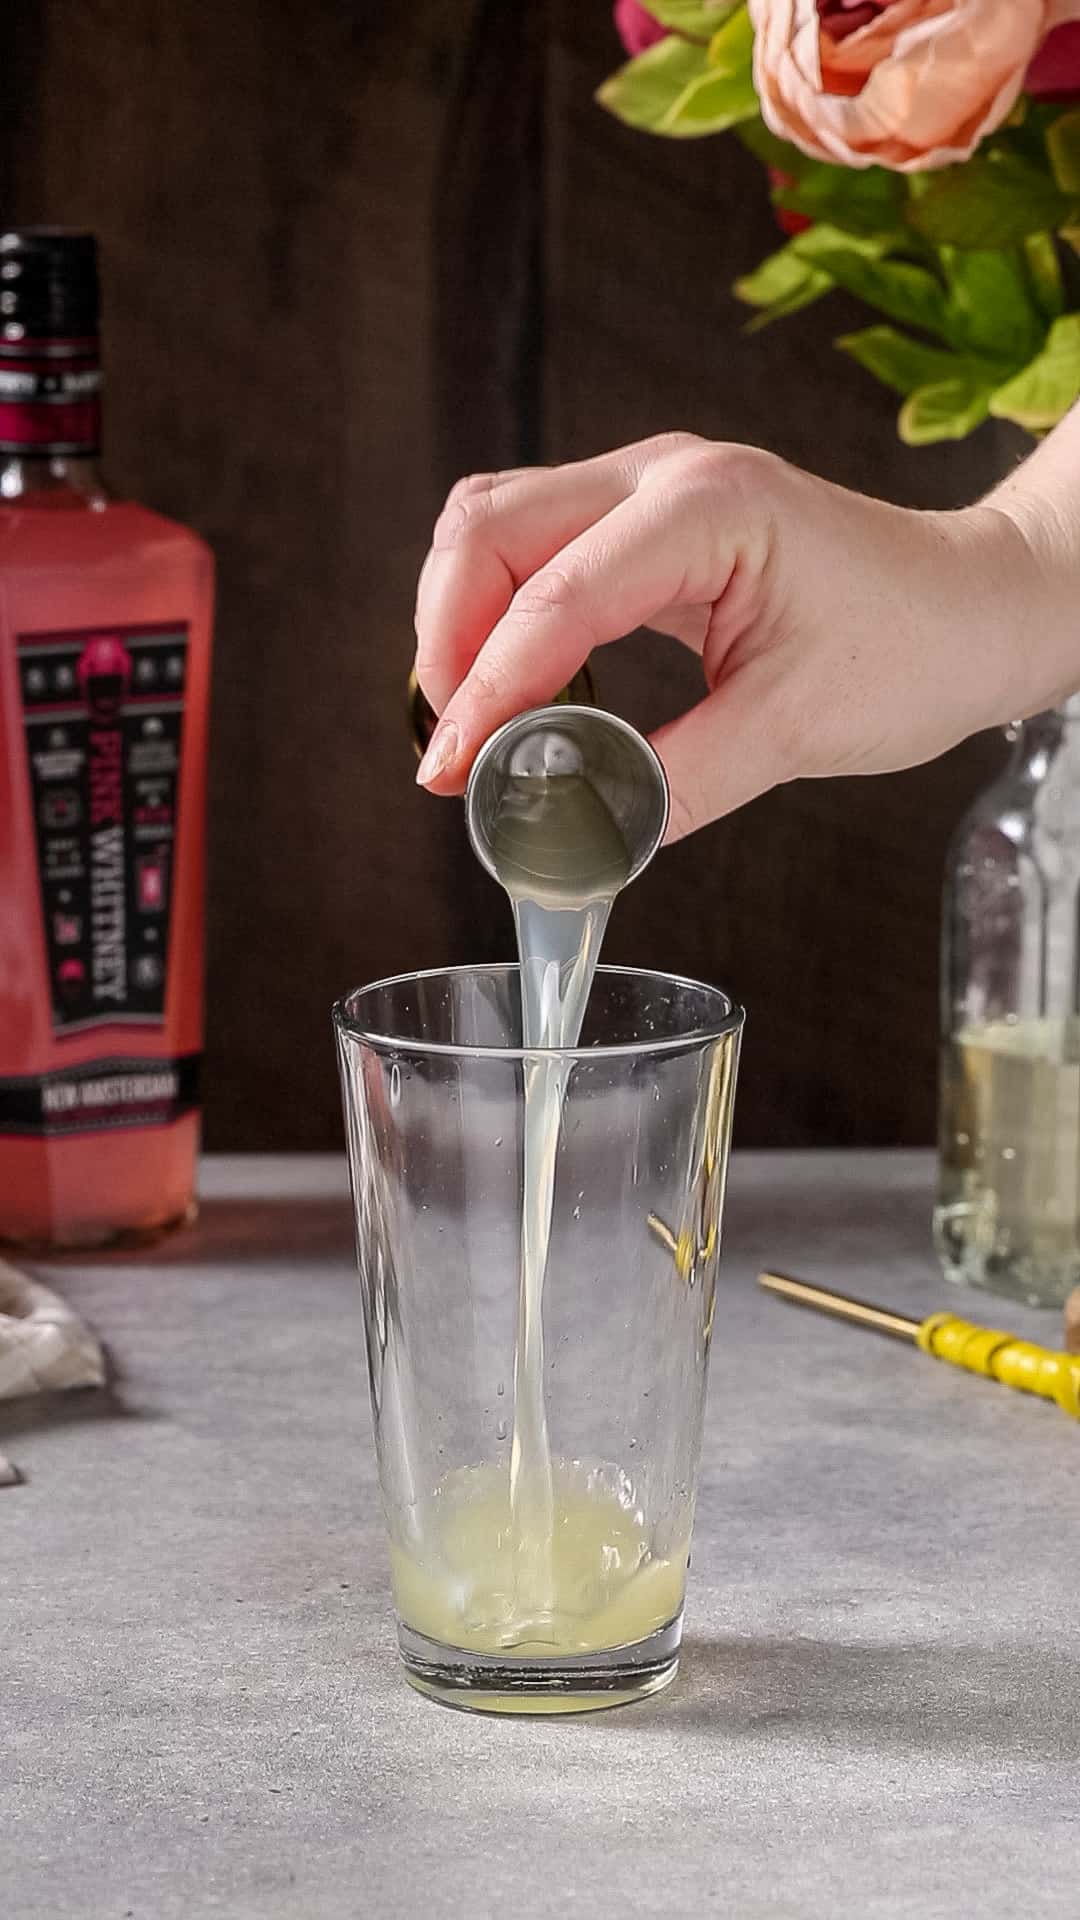 Lemon juice being added to the mixing glass.